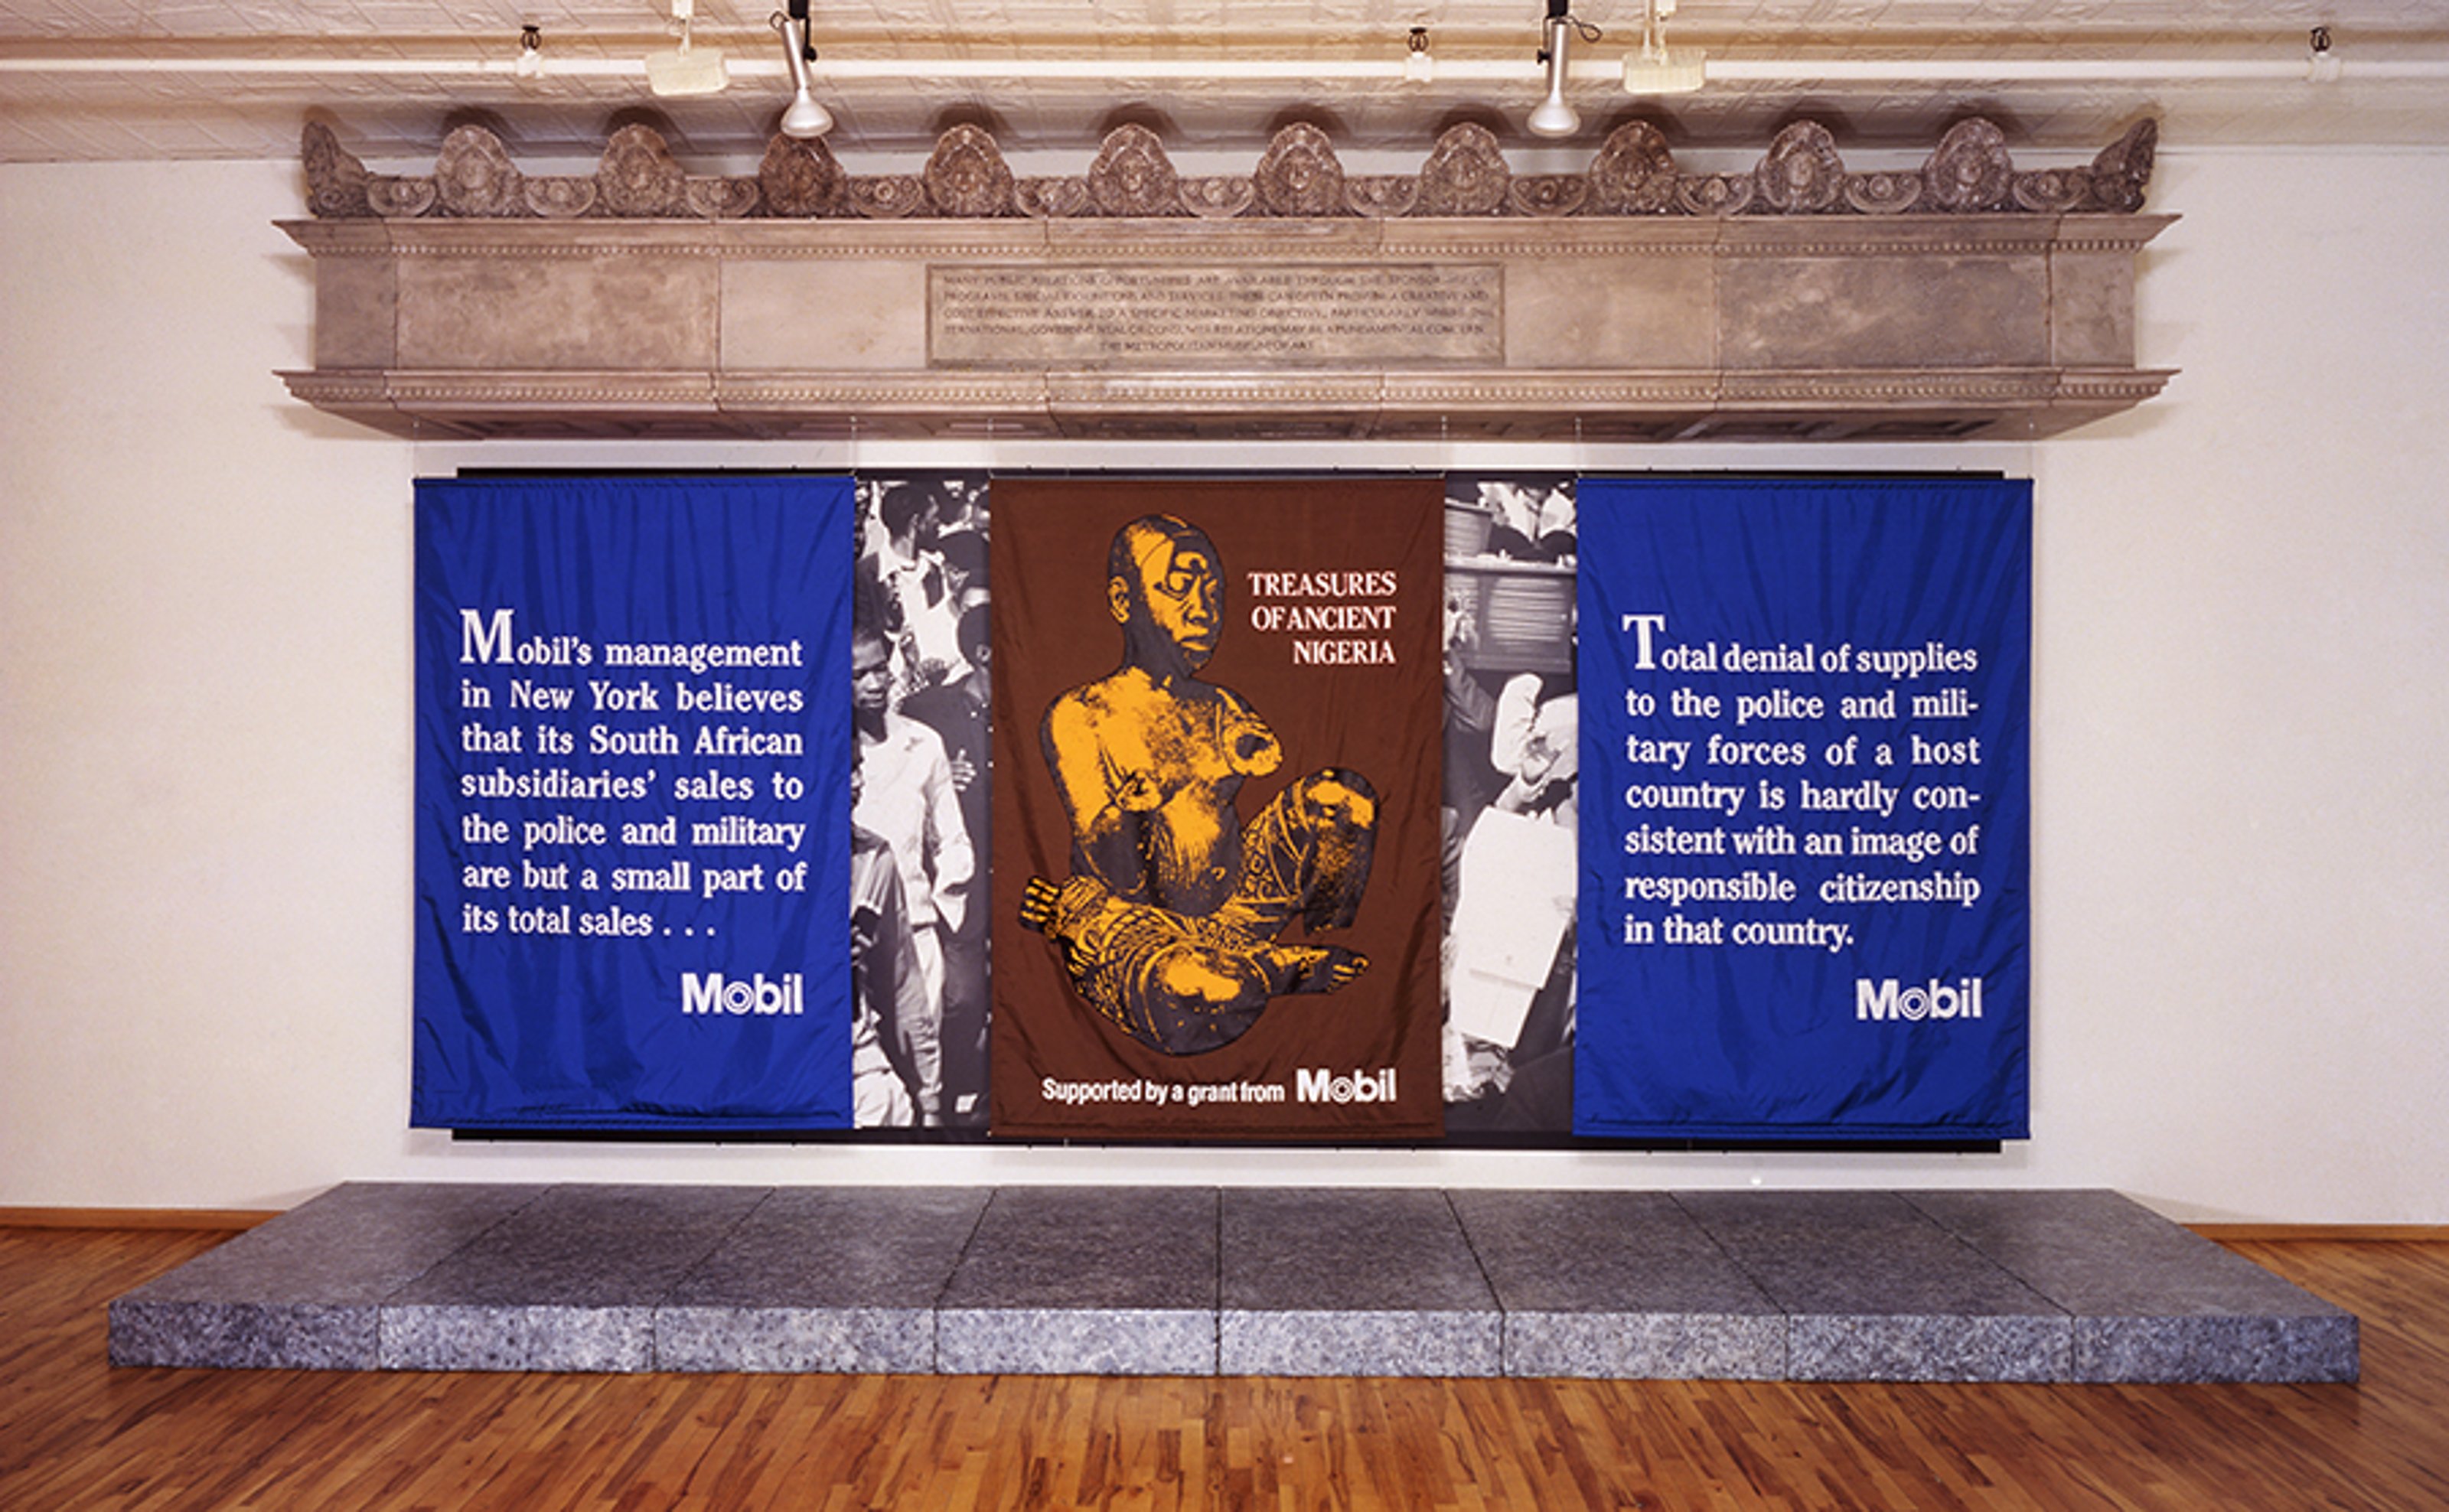 Haacke's installation. Three pieces of fabric hung like flags or a billboard ad. The installation contains statements from Mobil, the oil company. Descriptions from left to right: First one reads “ Mobil’s management in New York believes that its South African subsidiaries’ sales to the police and military are but a small part of its total sales…” In between is an image of a crowd, possibly from South Africa. The next fabric reads: “Treasures of Ancient Nigeria, Supported by a grant from Mobil.” With an image of a traditional Nigerian sculpture of a human form. In between is an image again from a crowd. The final fabric reads: “Total denial of supplies to the police and military forces of a host country is hardly consistent with an image of responsible citizenship in that country. Mobil.”